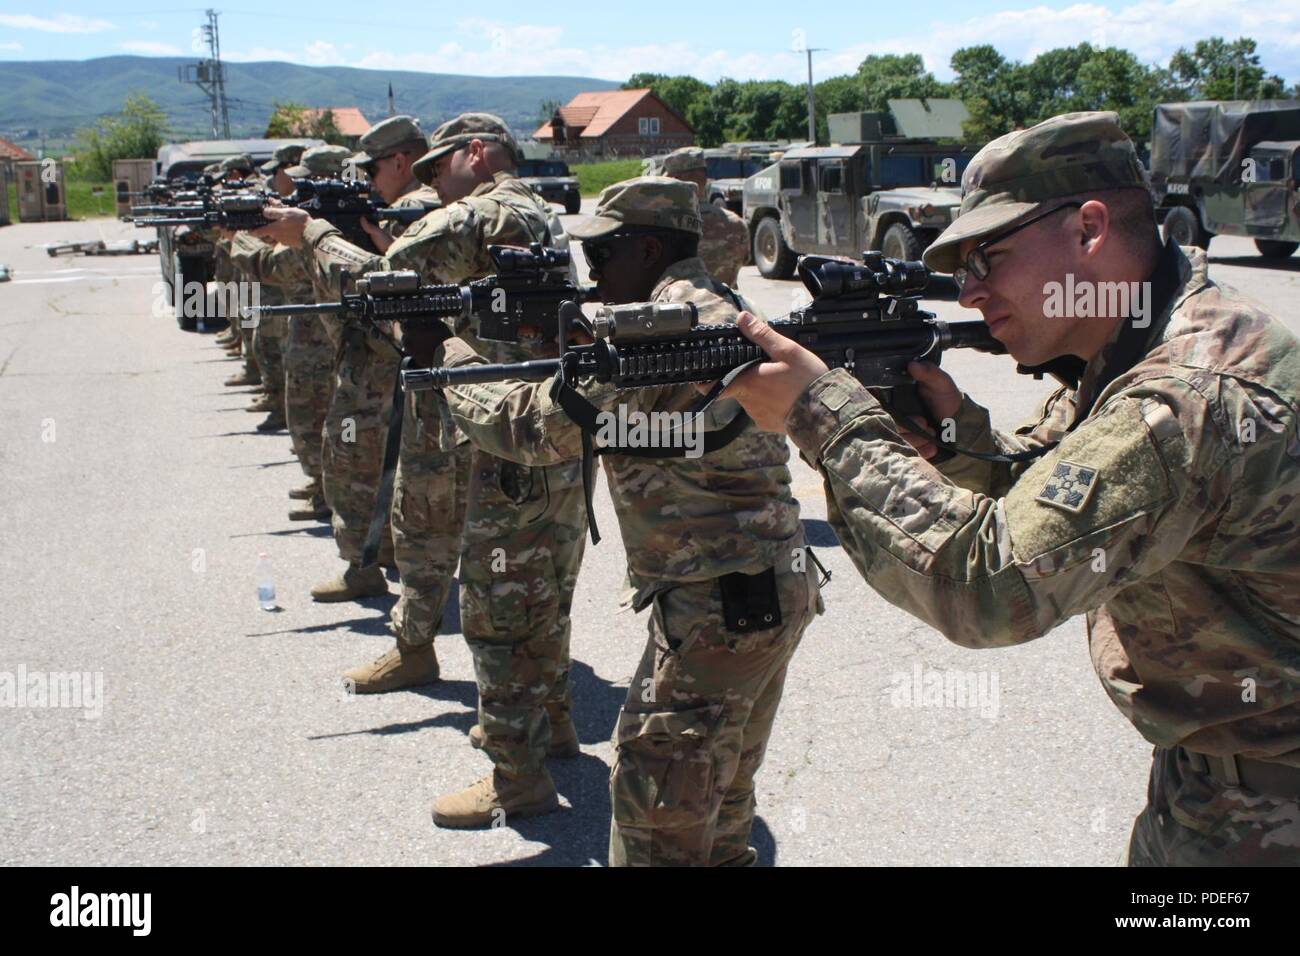 Soldiers from 1st Platoon, Alpha Troop, conduct ready-up drills during reflexive fire and target acquisition training May 17 at Camp Marechal De Lattre De Tassingny, Kosovo. Stock Photo